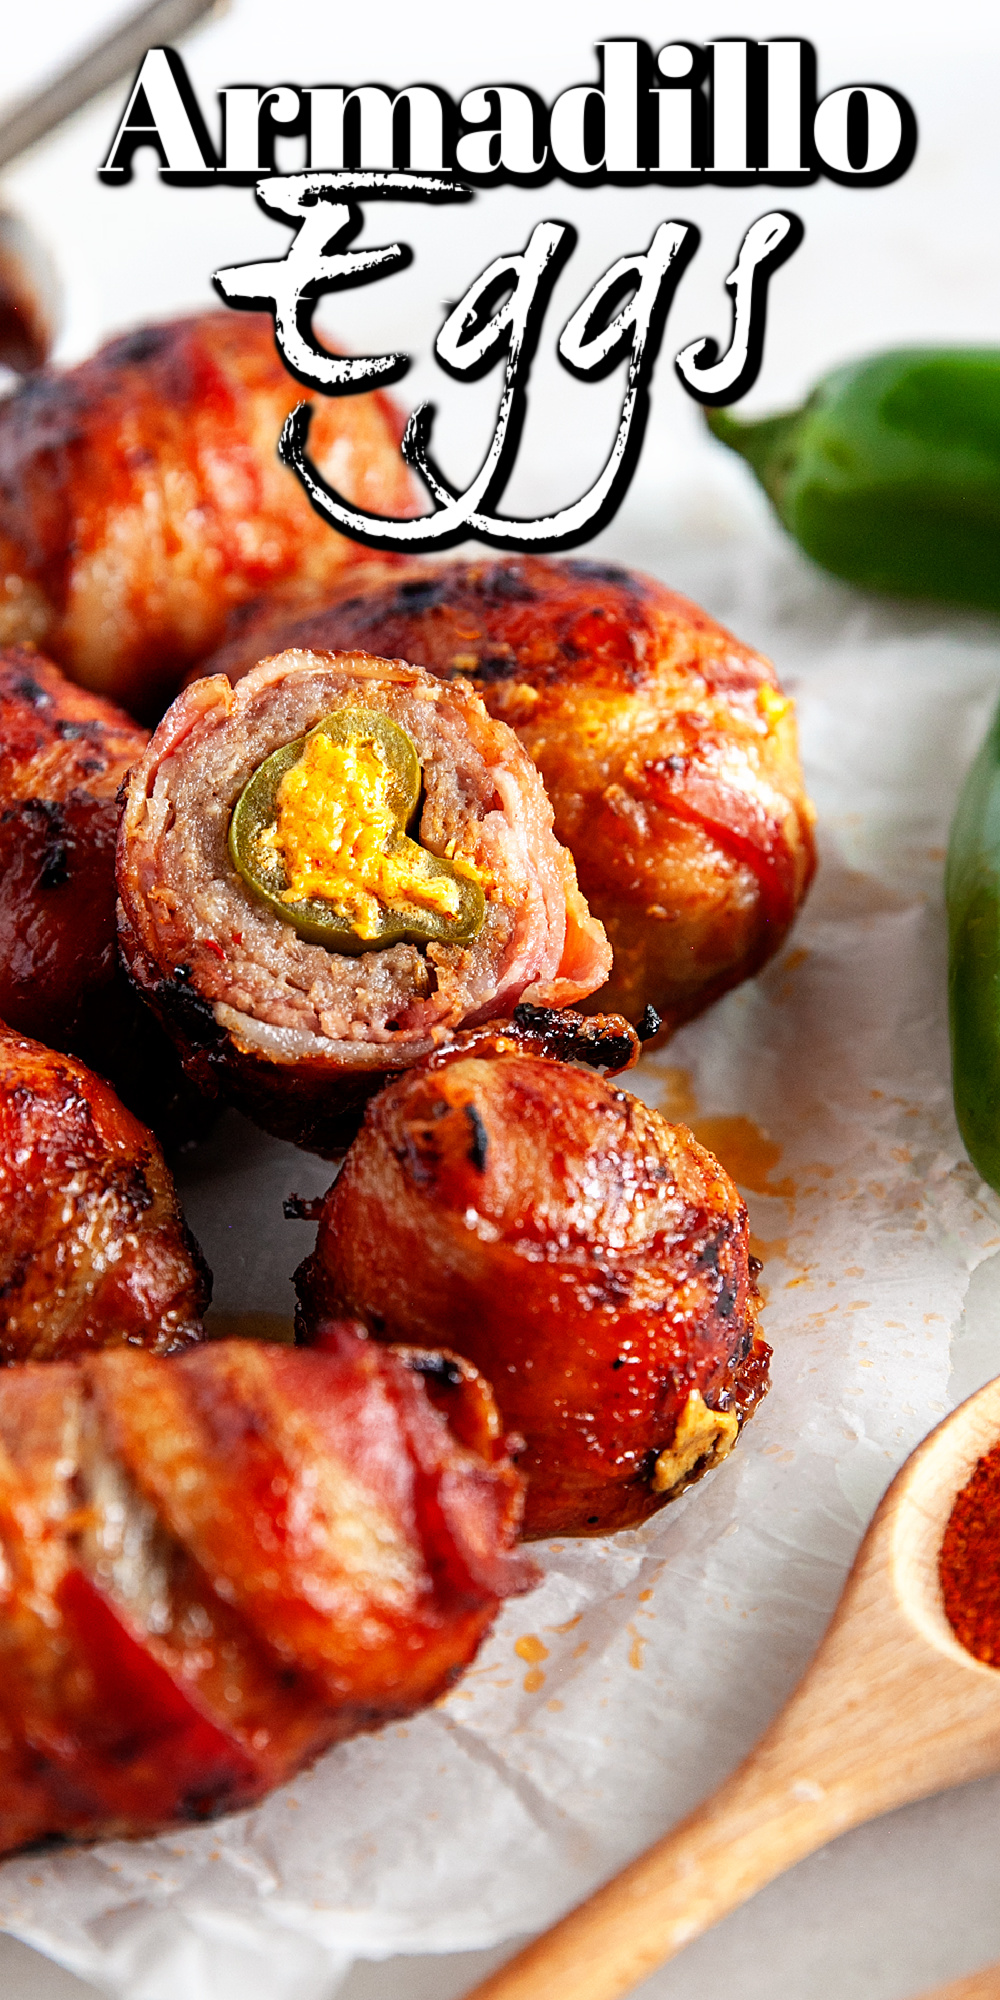 These armadillo eggs are fantastic! The spicy jalapeno, the creamy cheese, the sausage and bacon. What's not to love?